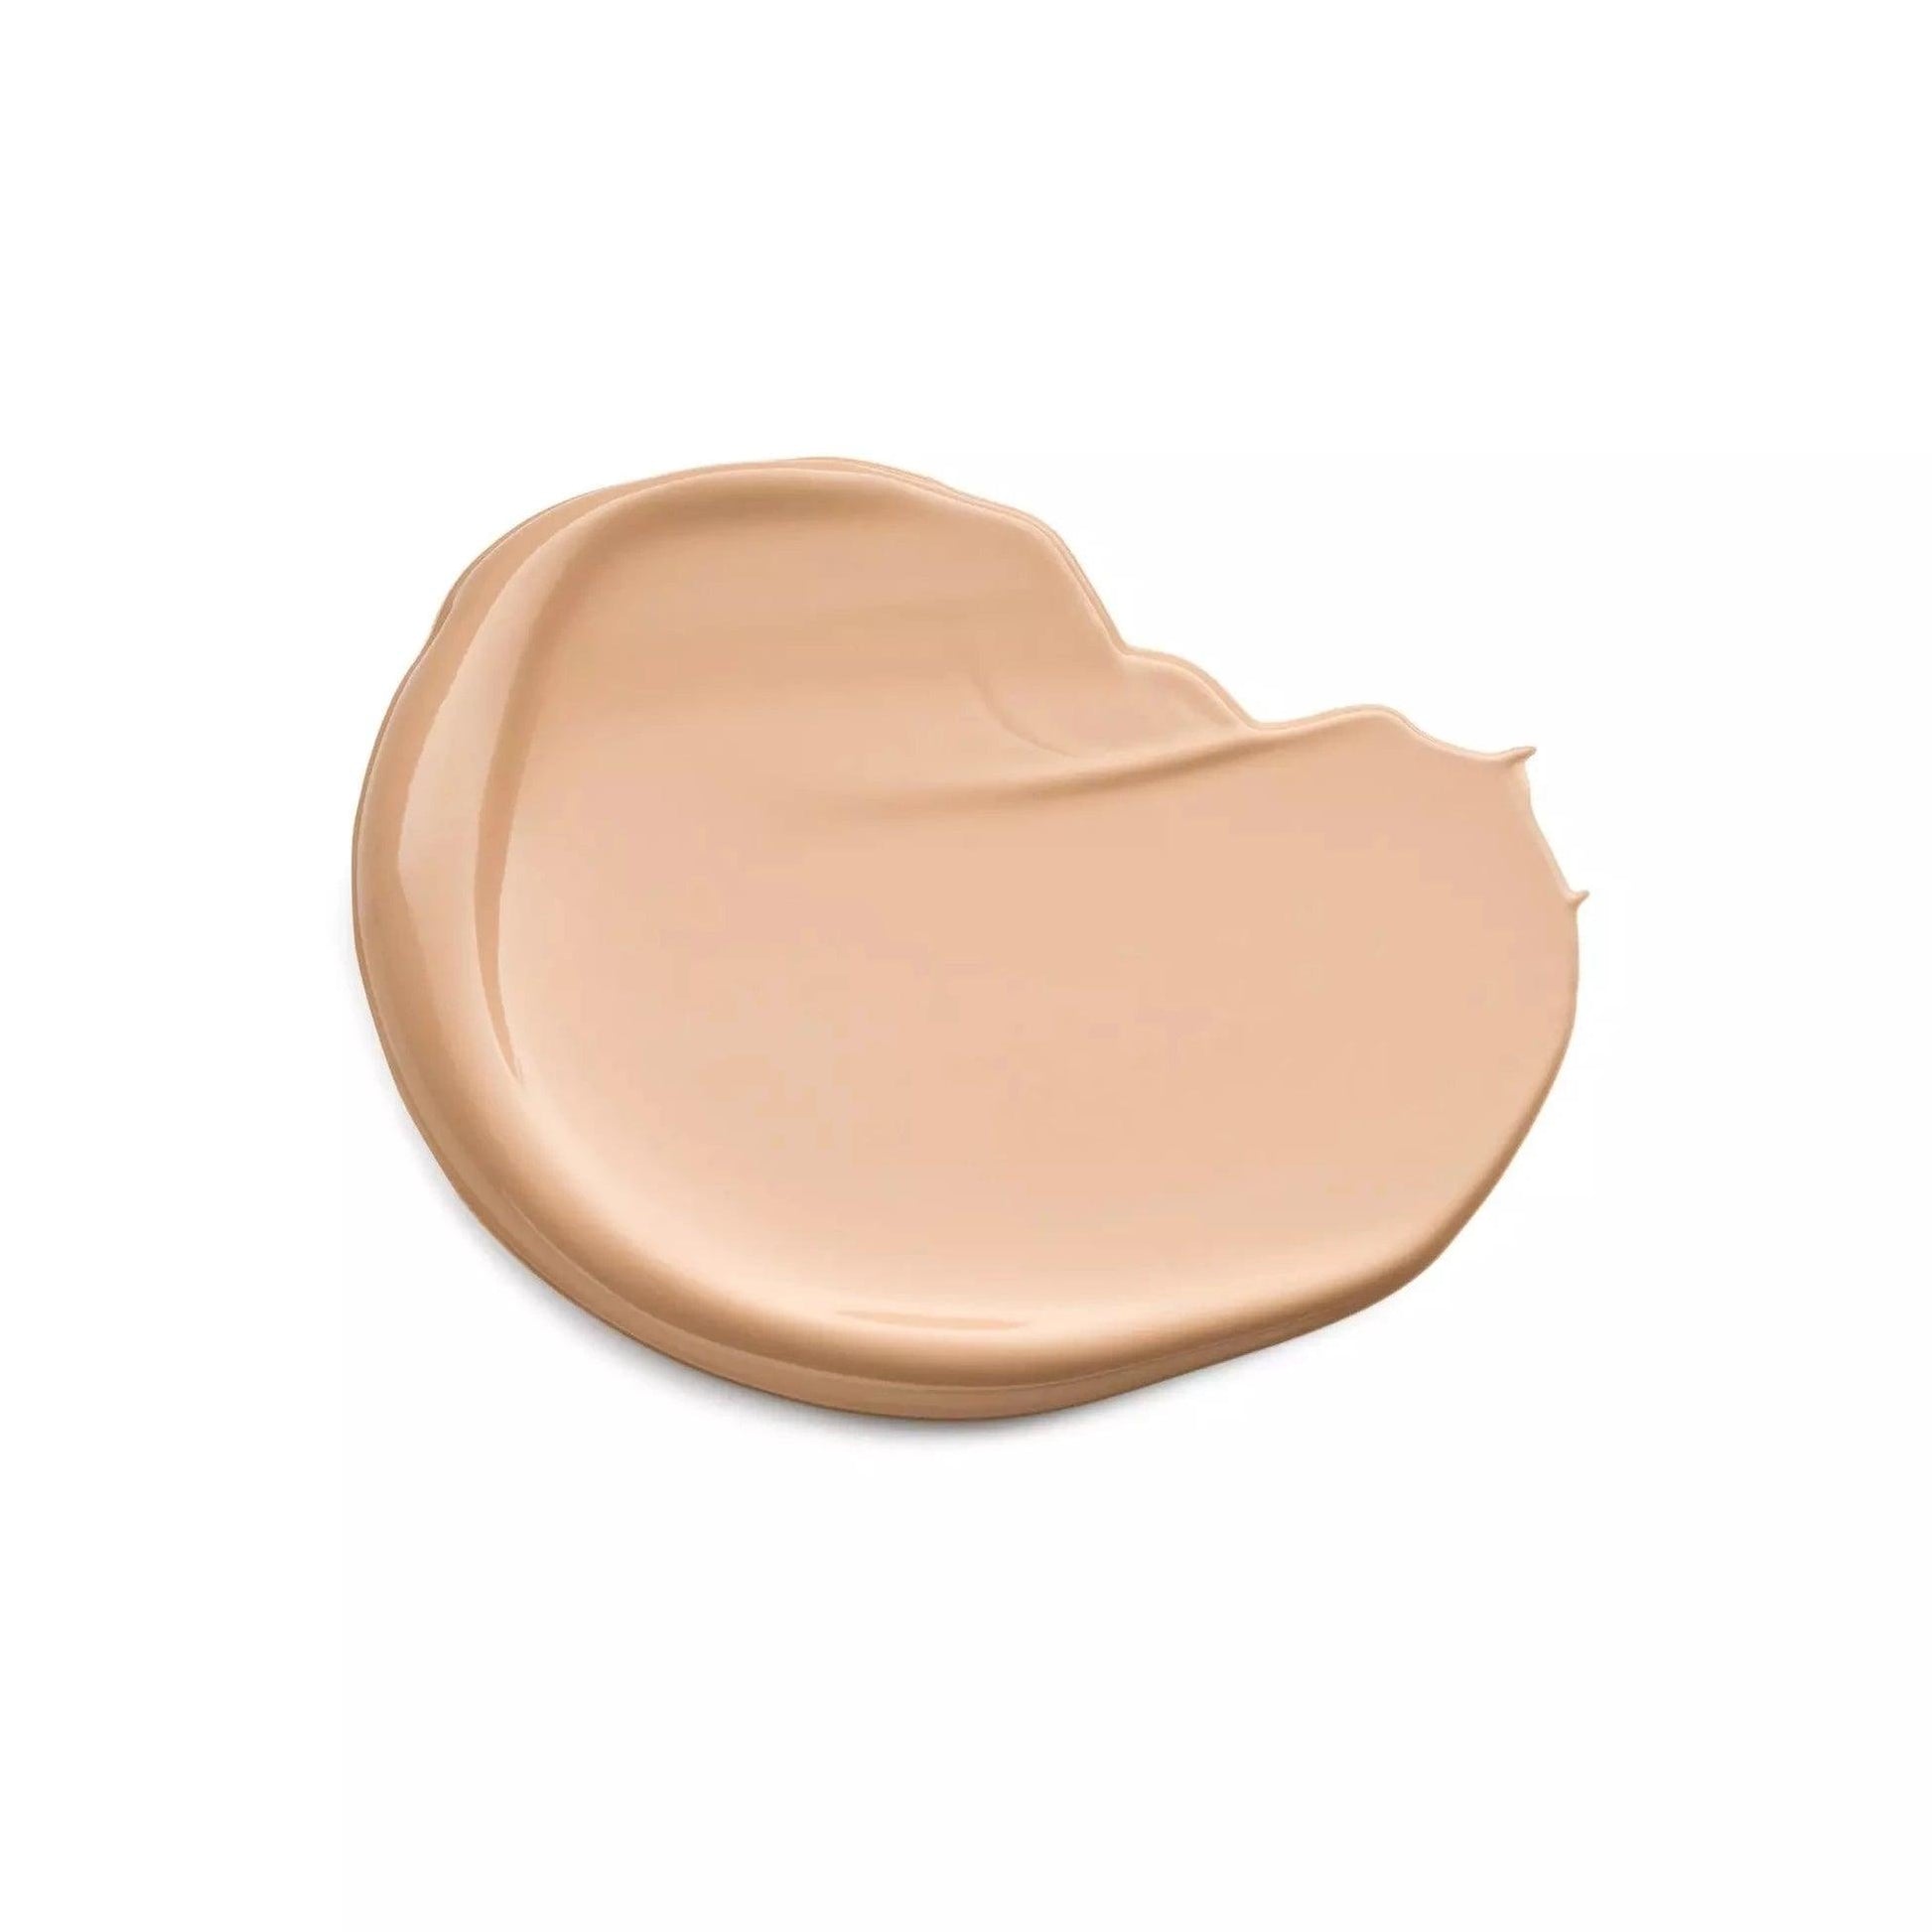 Catrice Liquid Camouflage High Coverage Concealer 020 Light Beige - Beauty Bounty